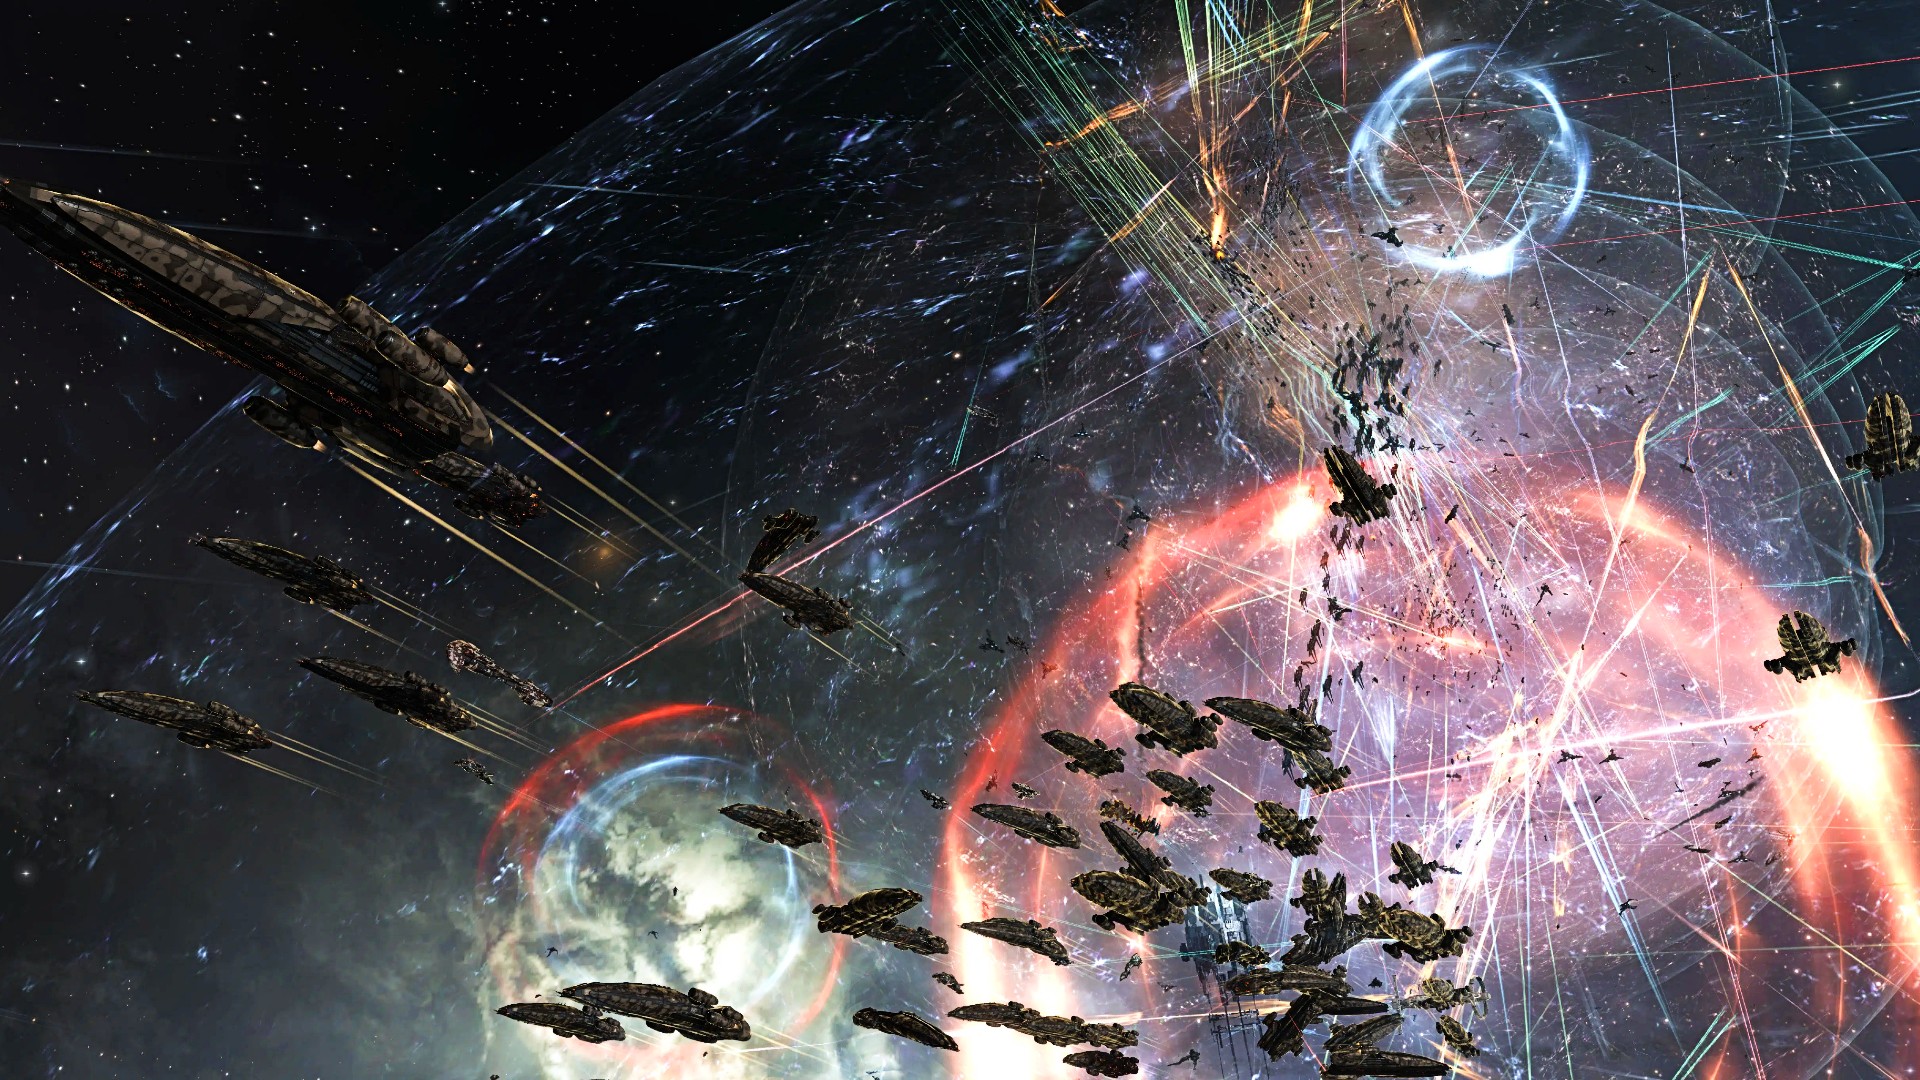 Eve Online’s World War Bee II is ending after more than a year